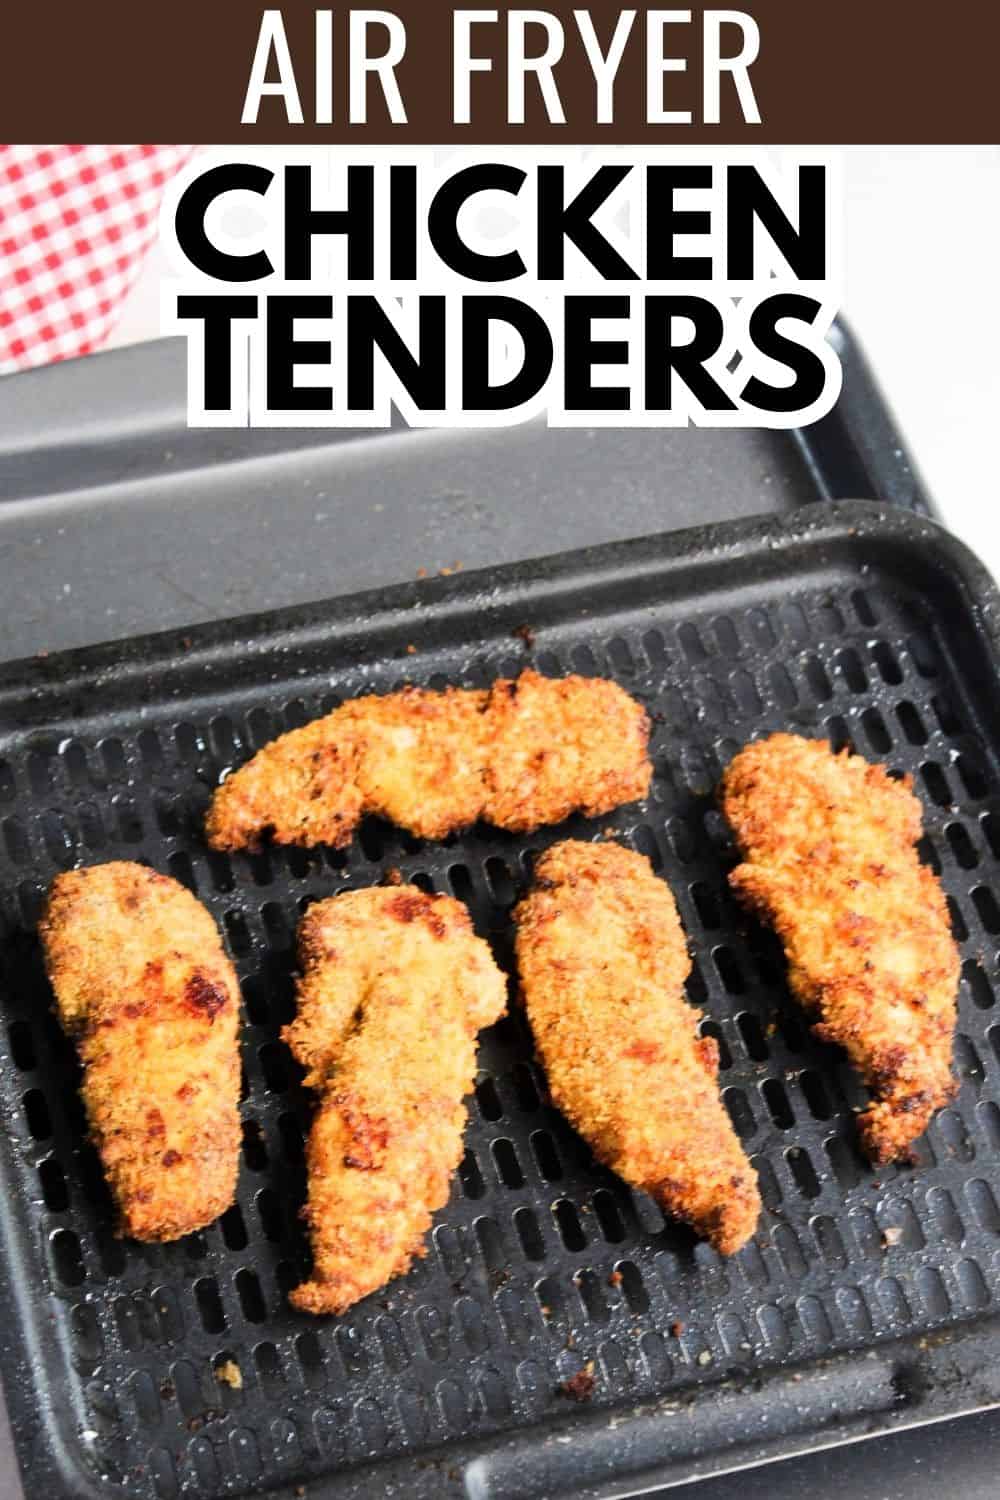 An air fryer with chicken tenders on it.